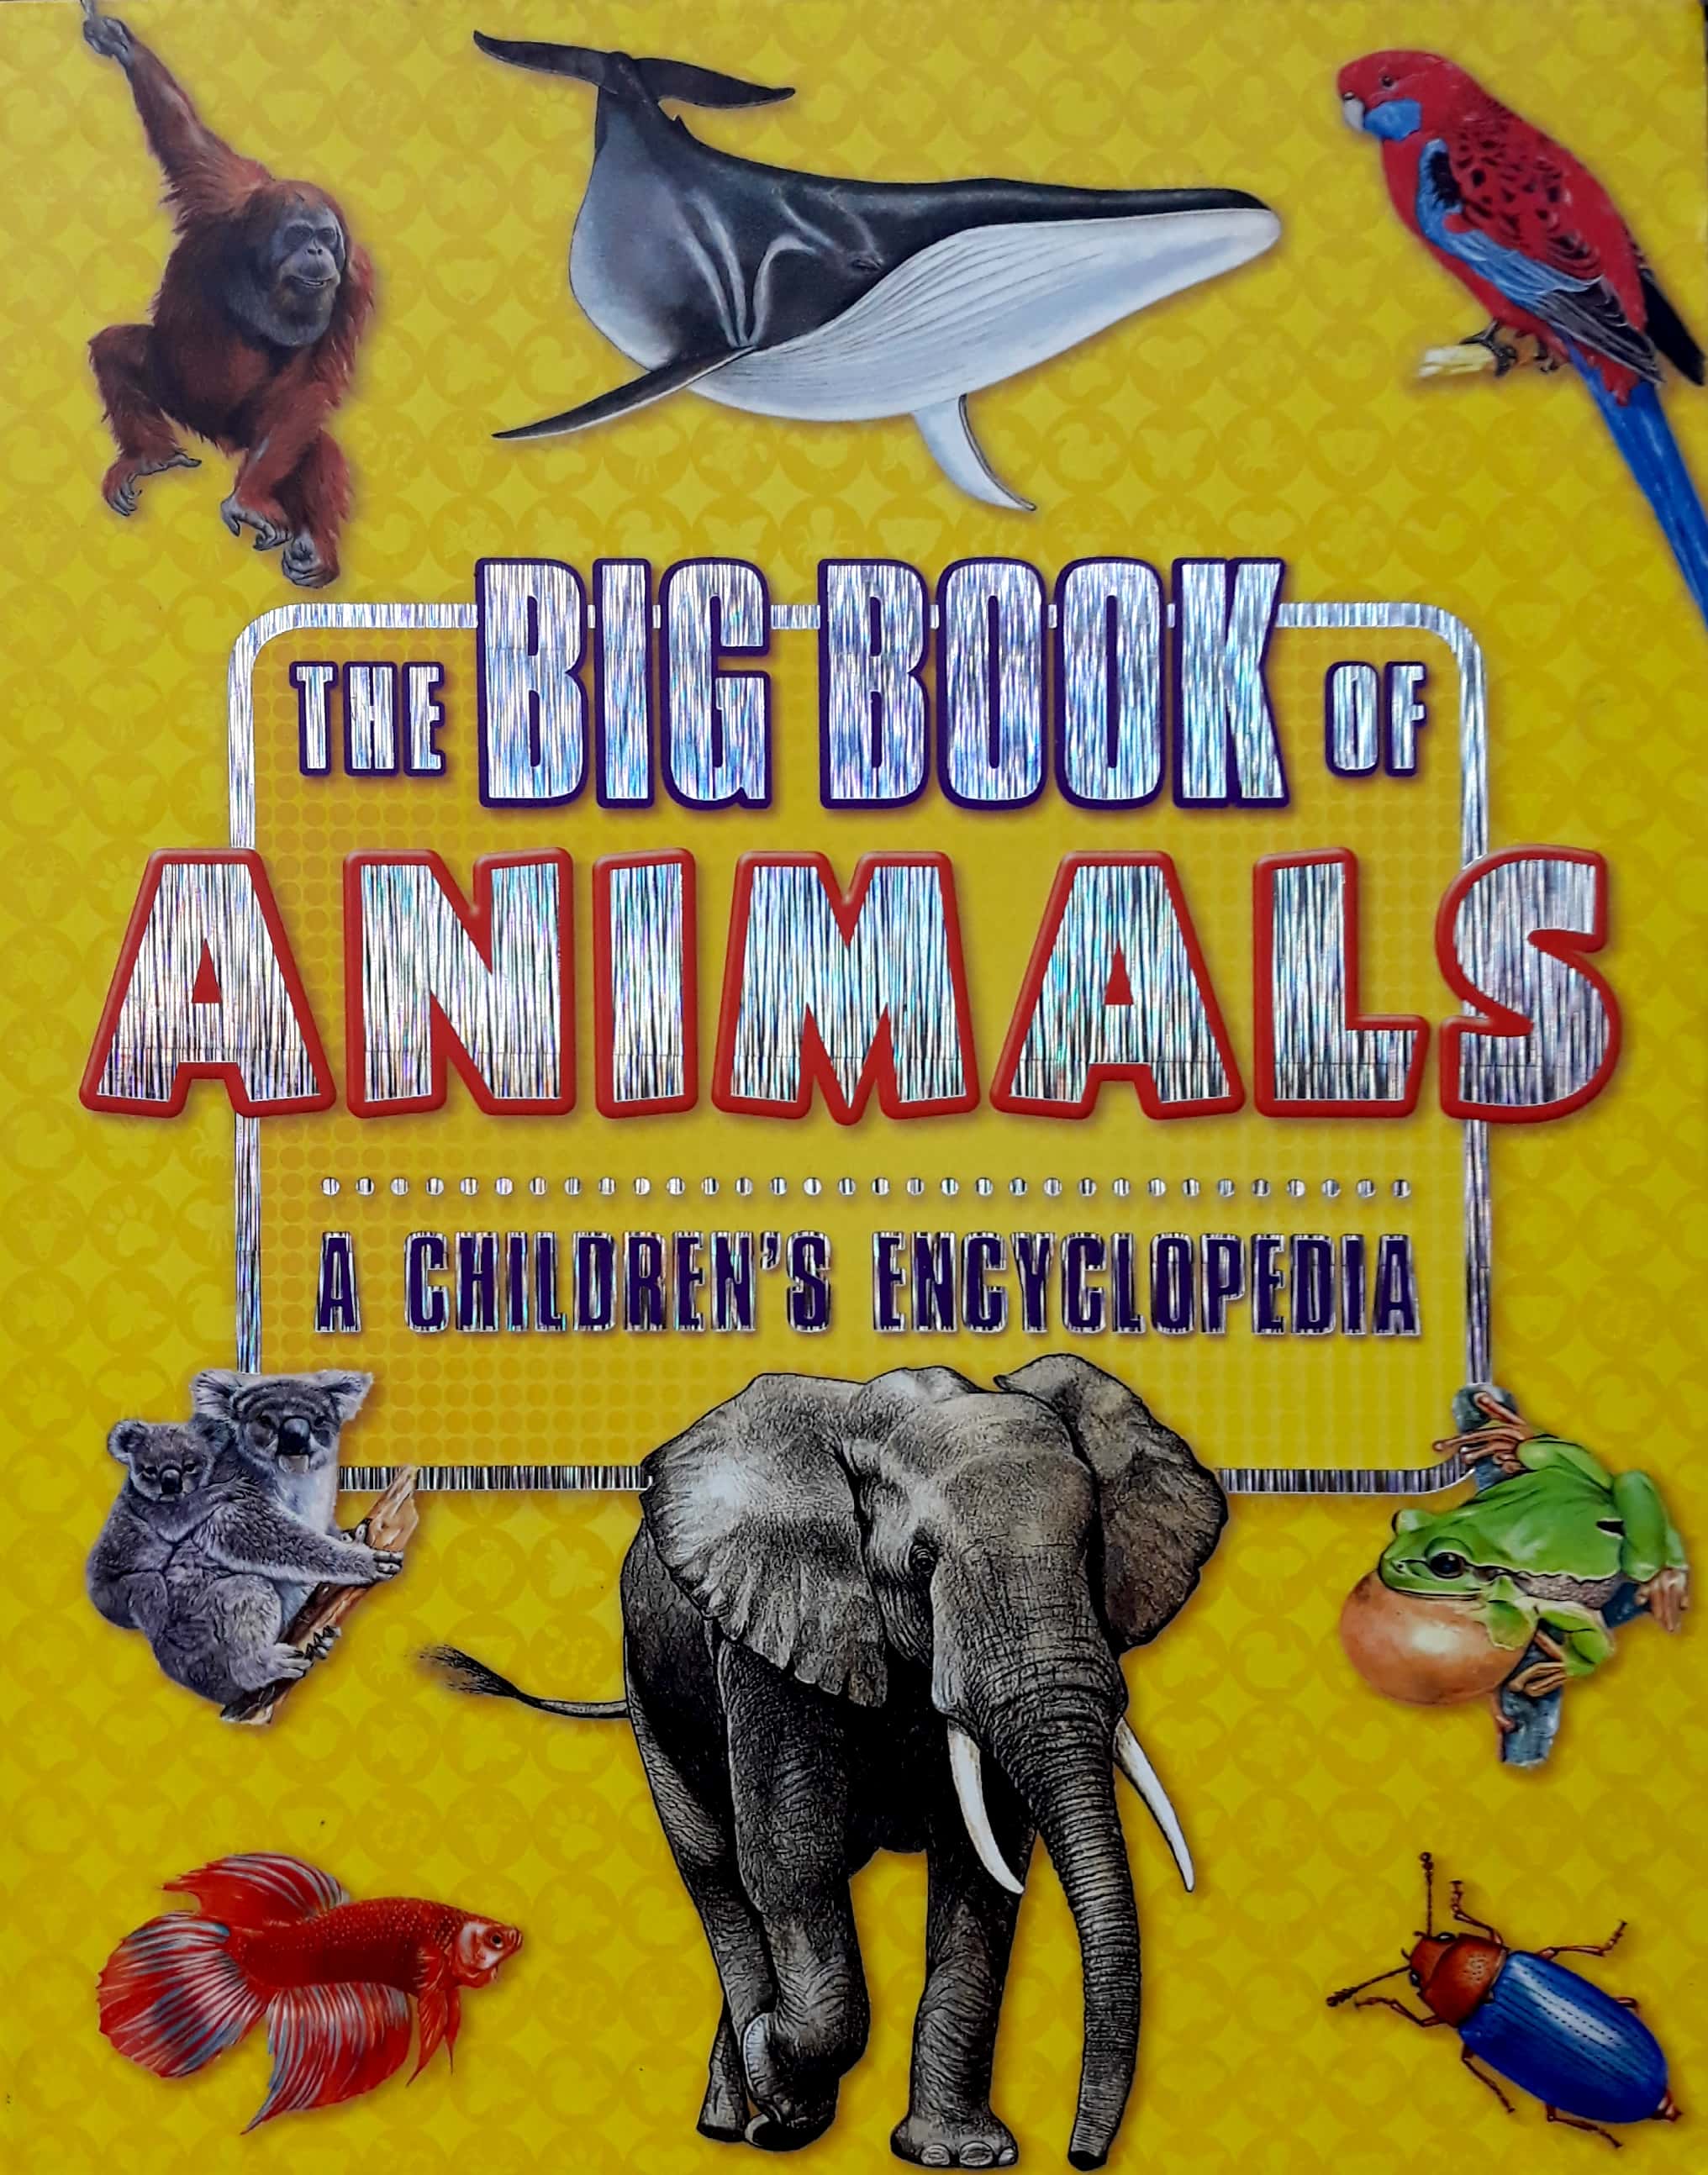 The Big Book Of Animals